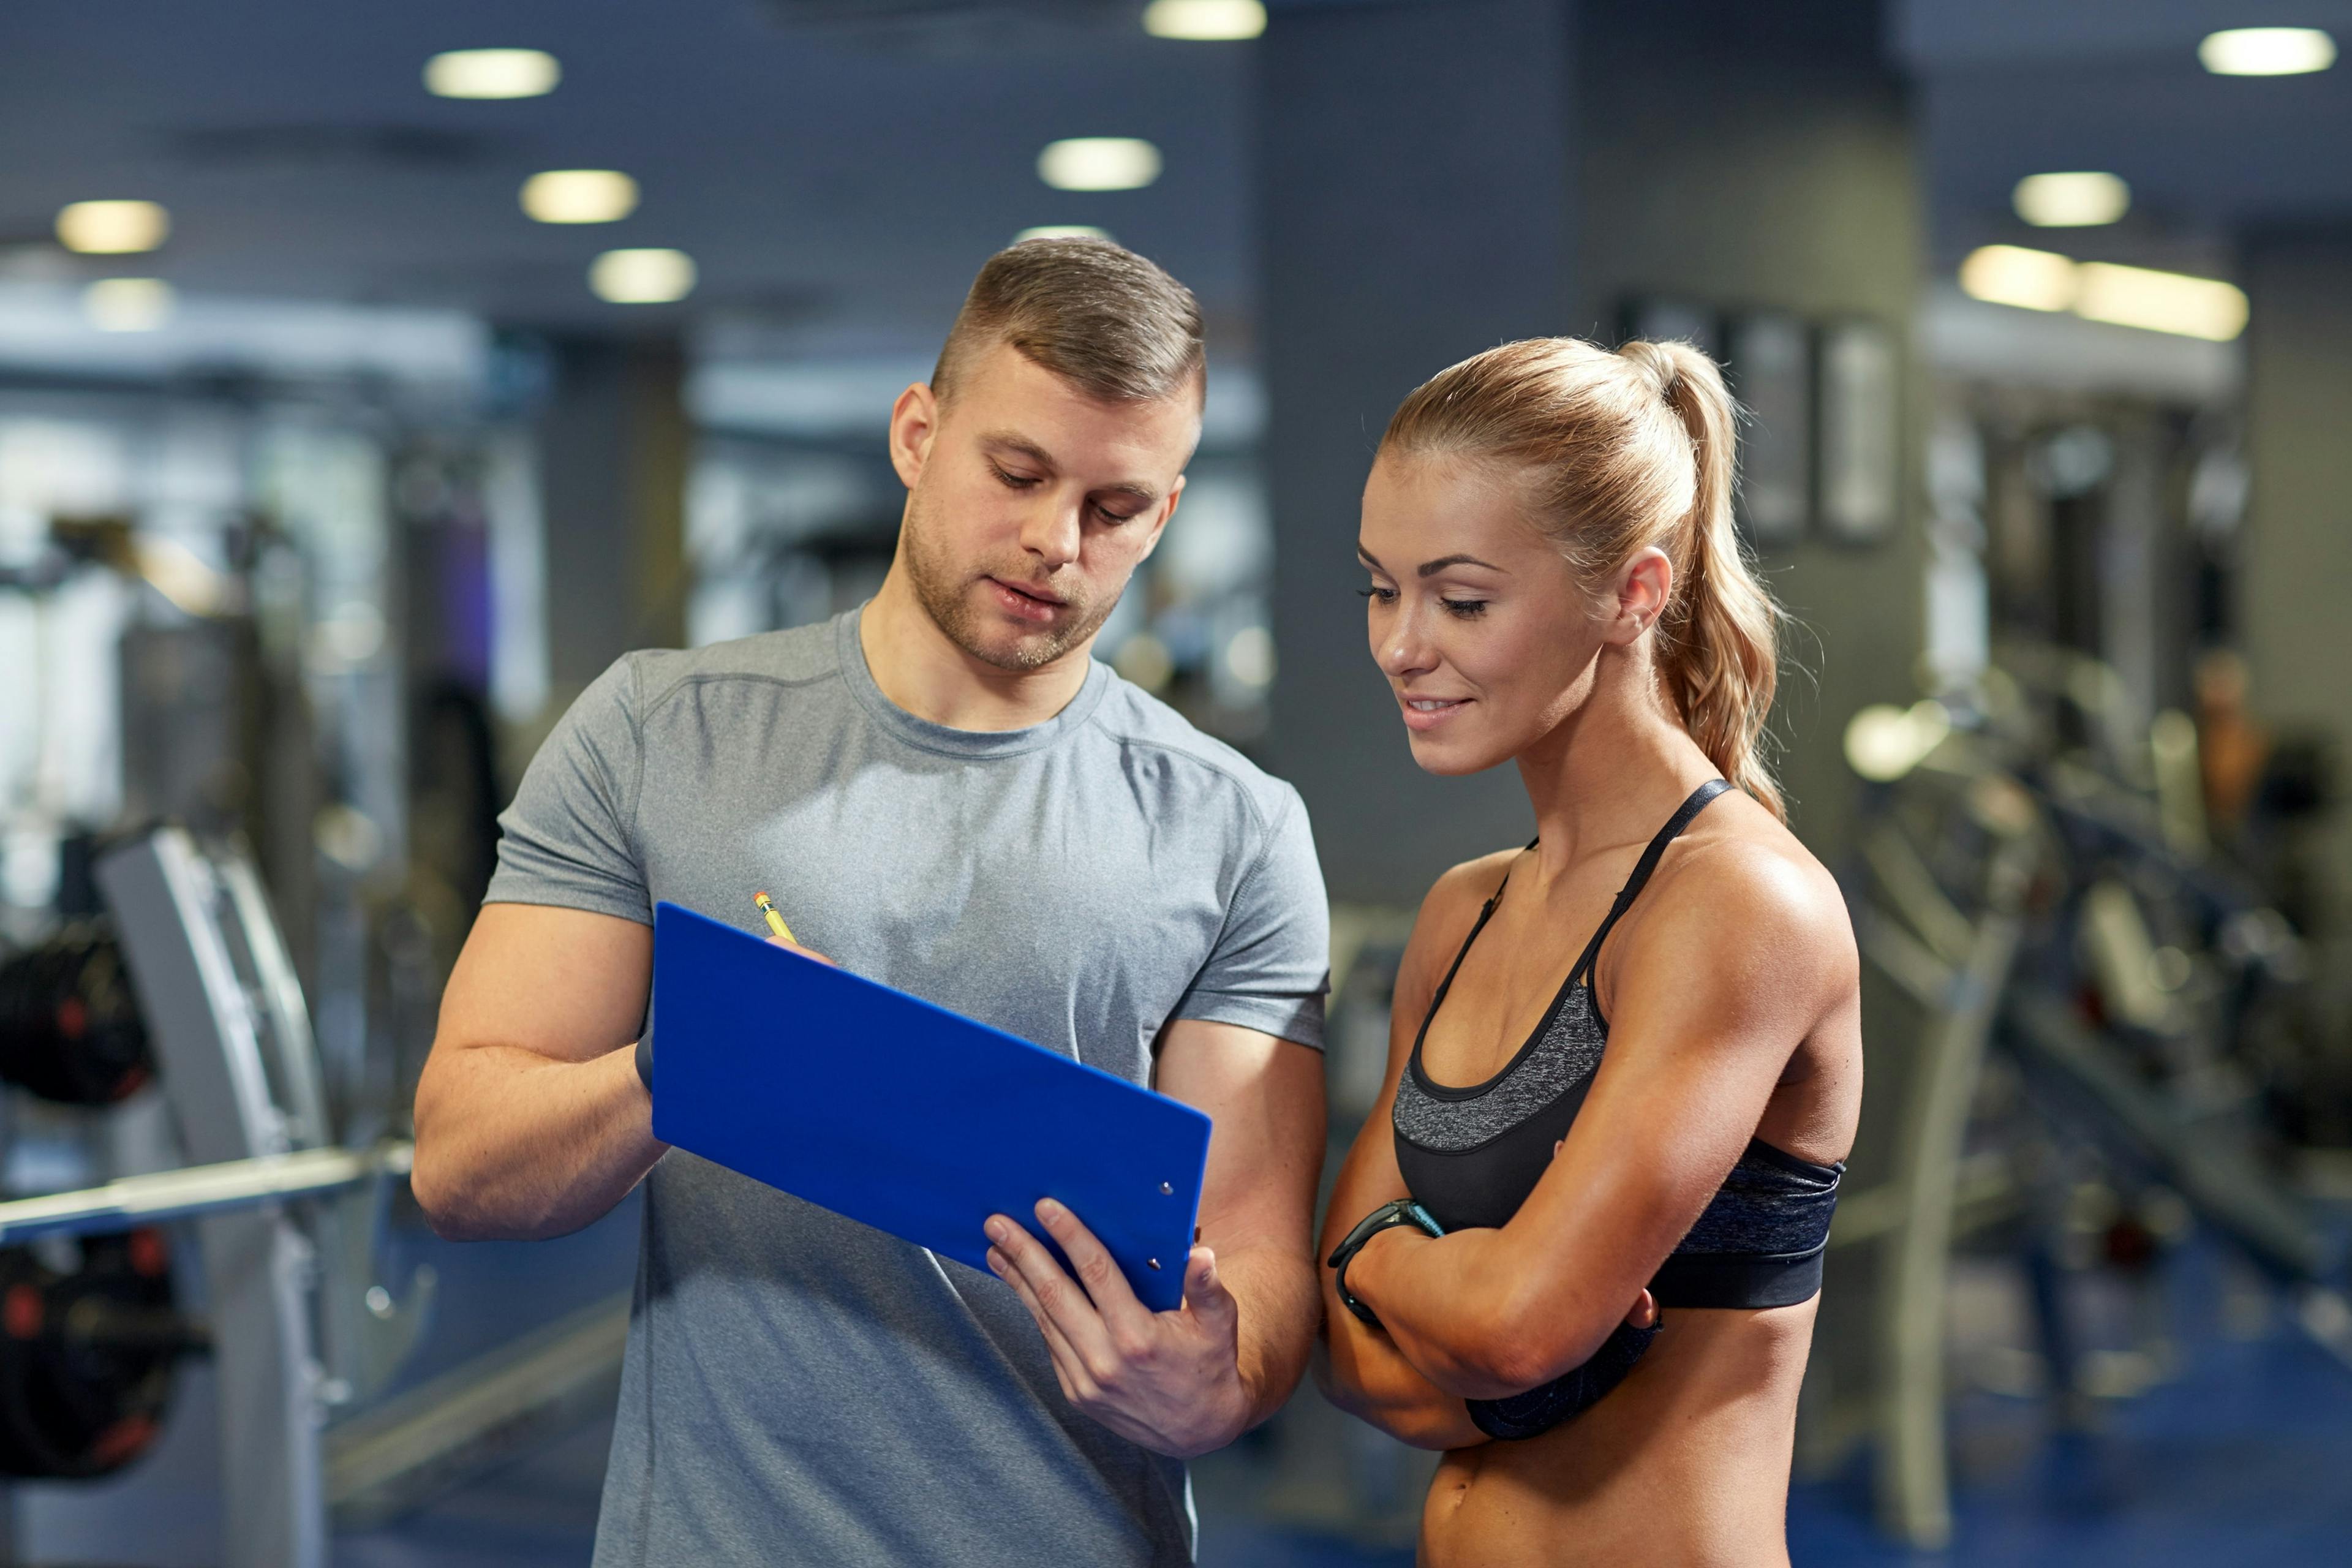 What to expect from a personal trainer